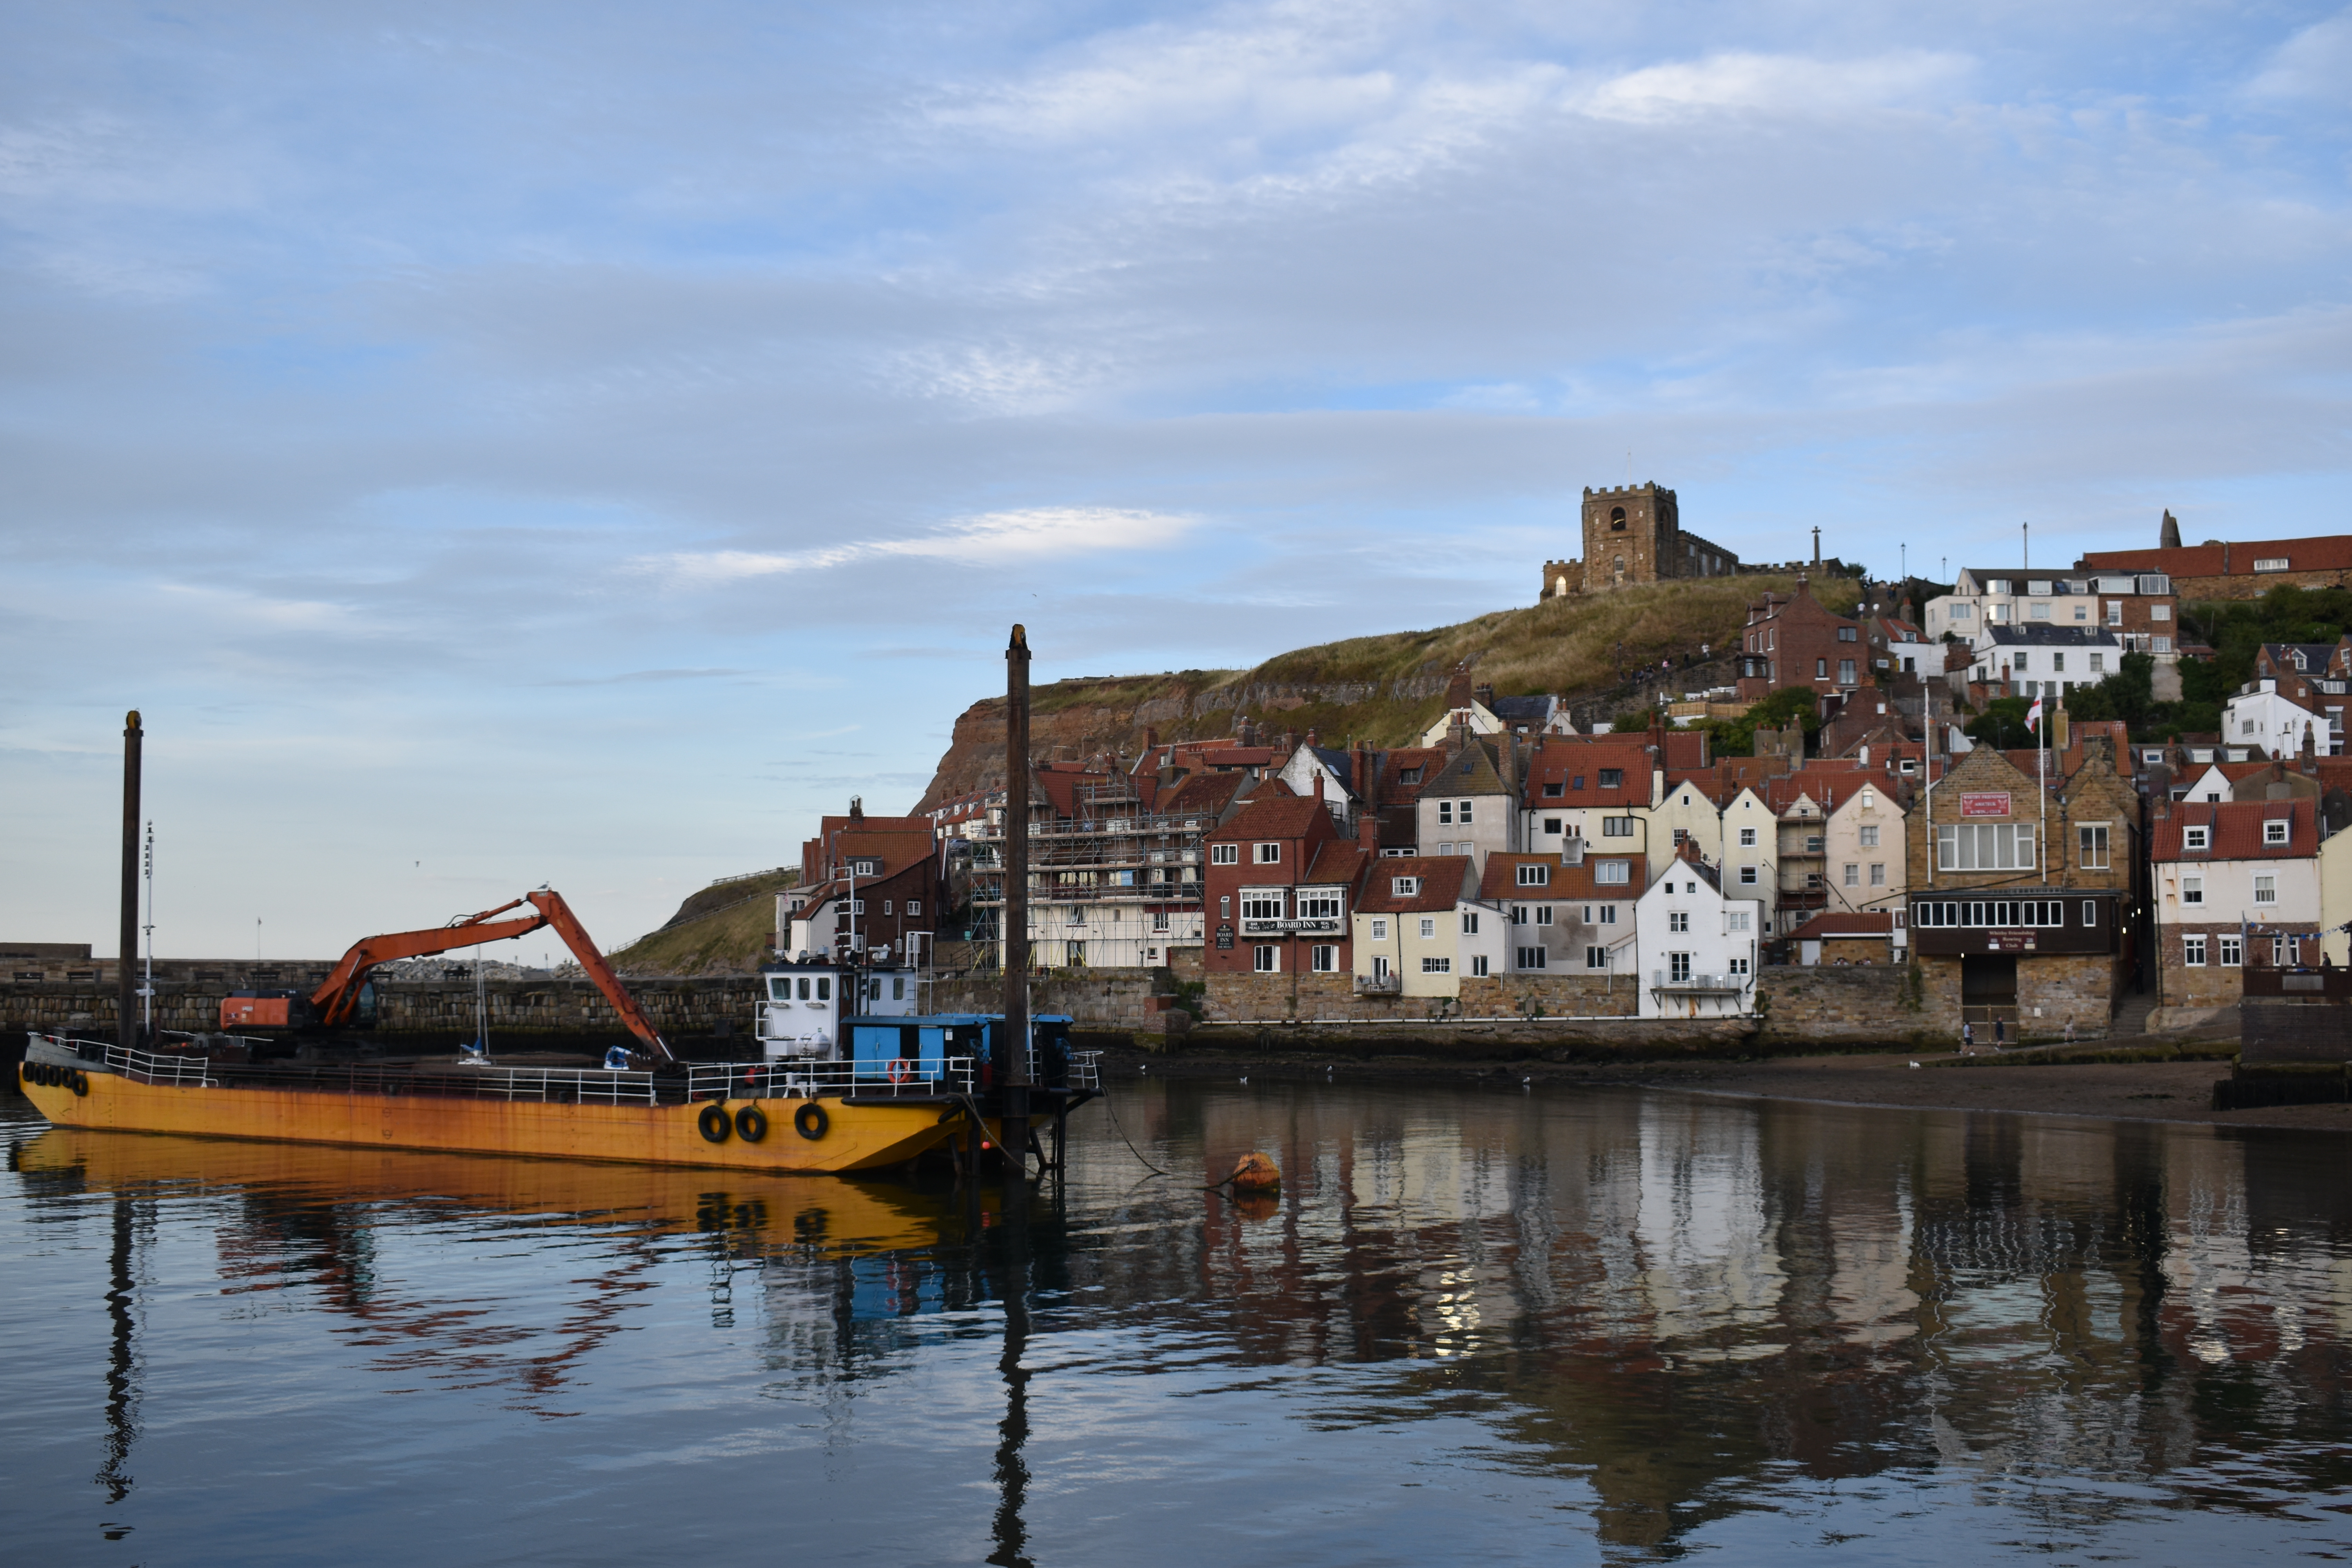 Whitby Castle from a distance